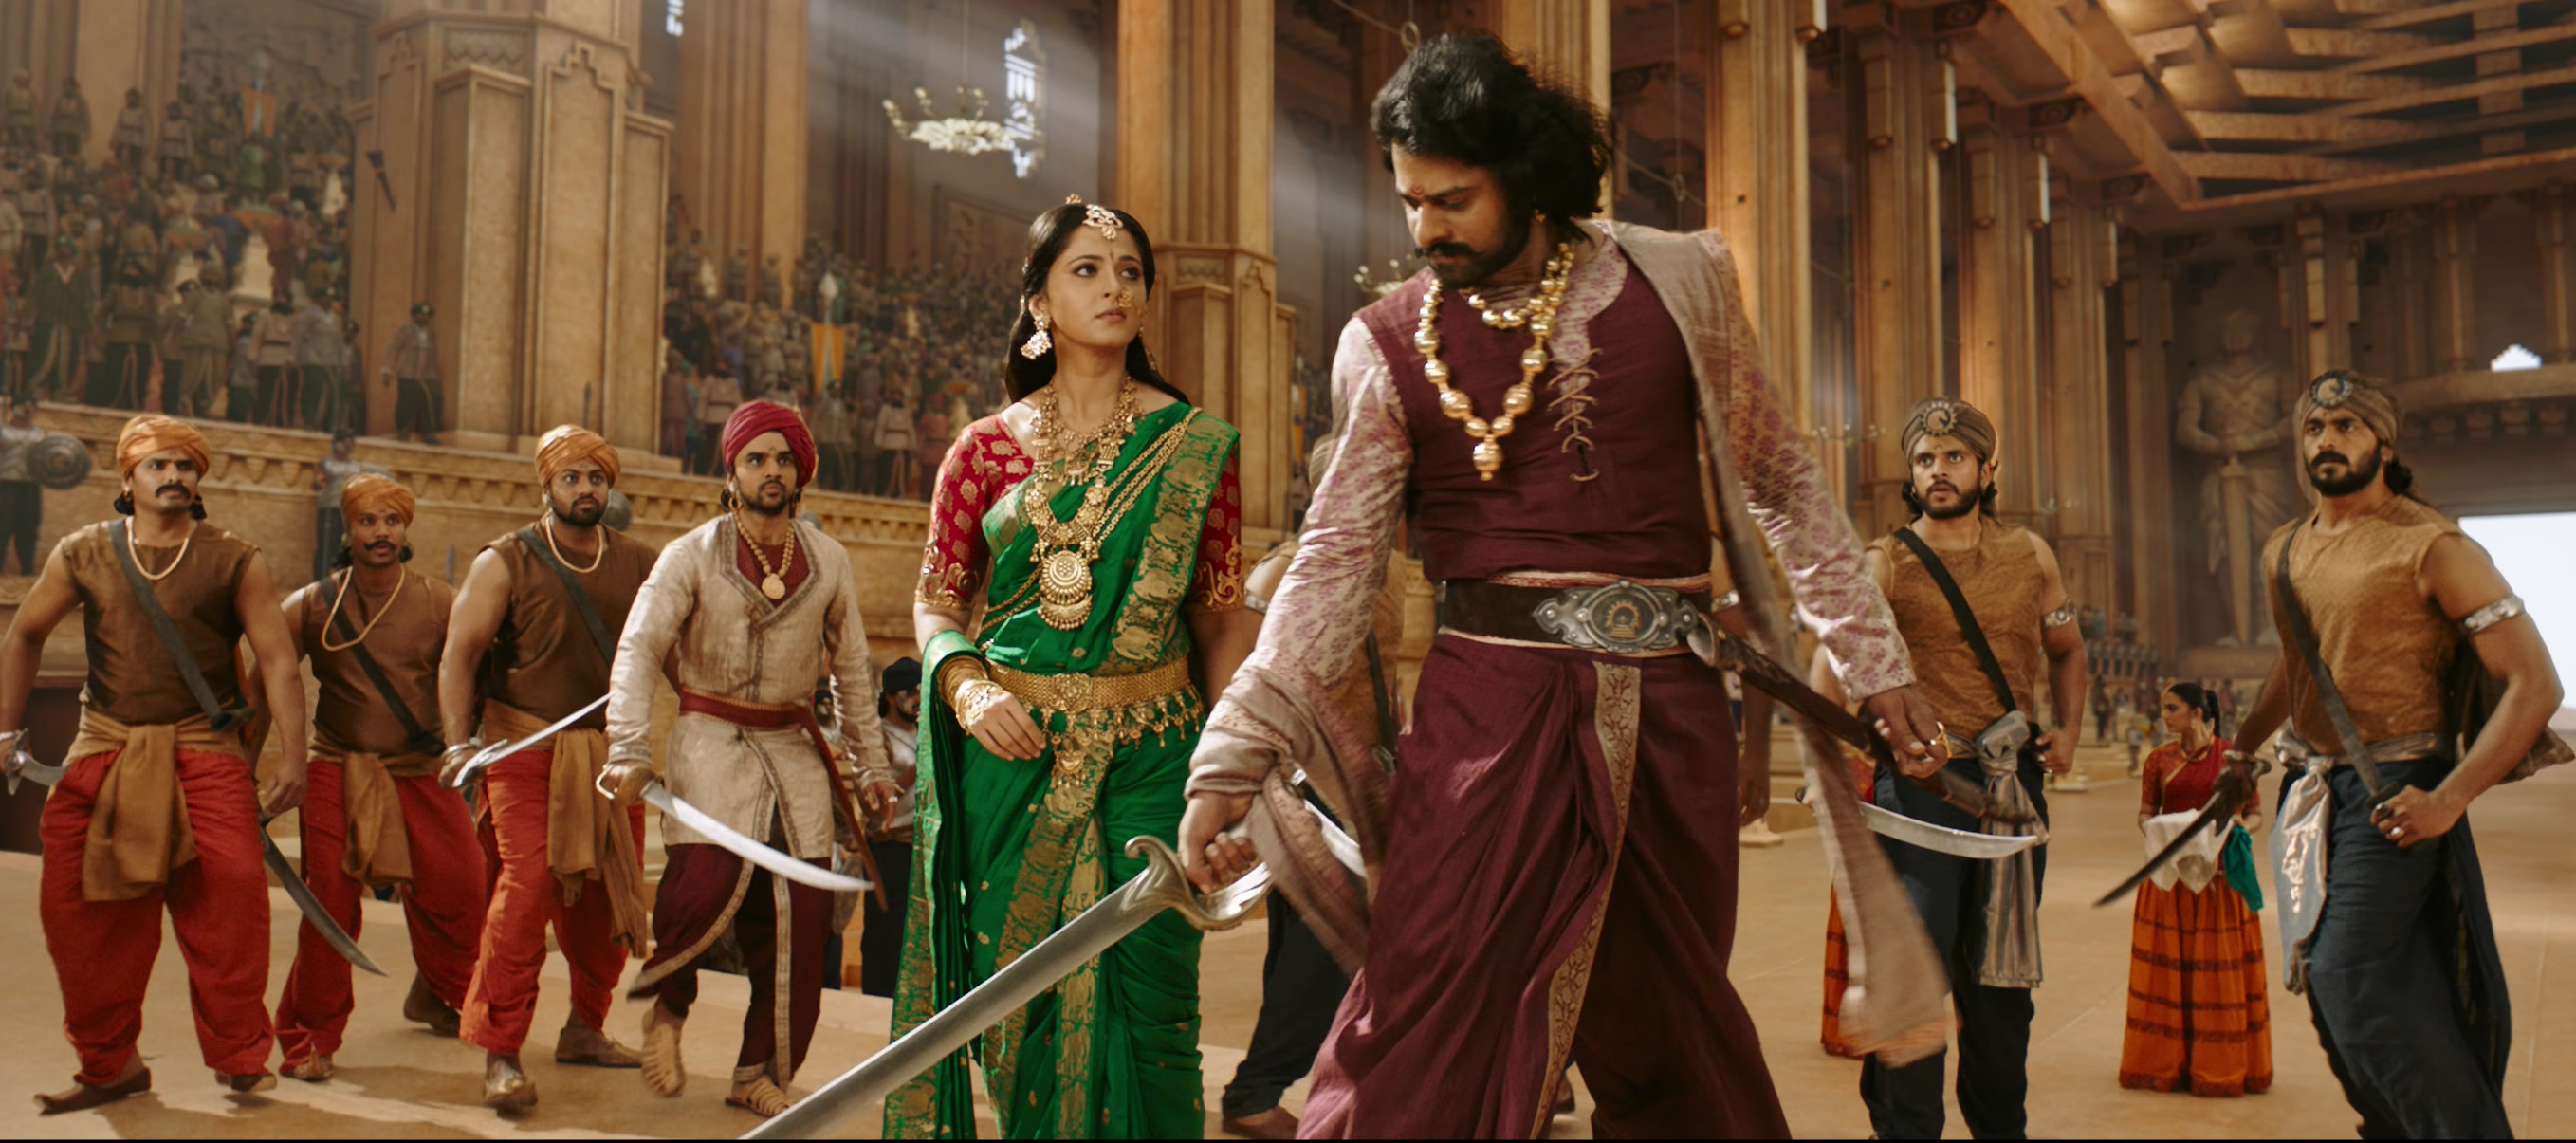 Baahubali – The Conclusion Film, Watch, Download Free Movie Trailer